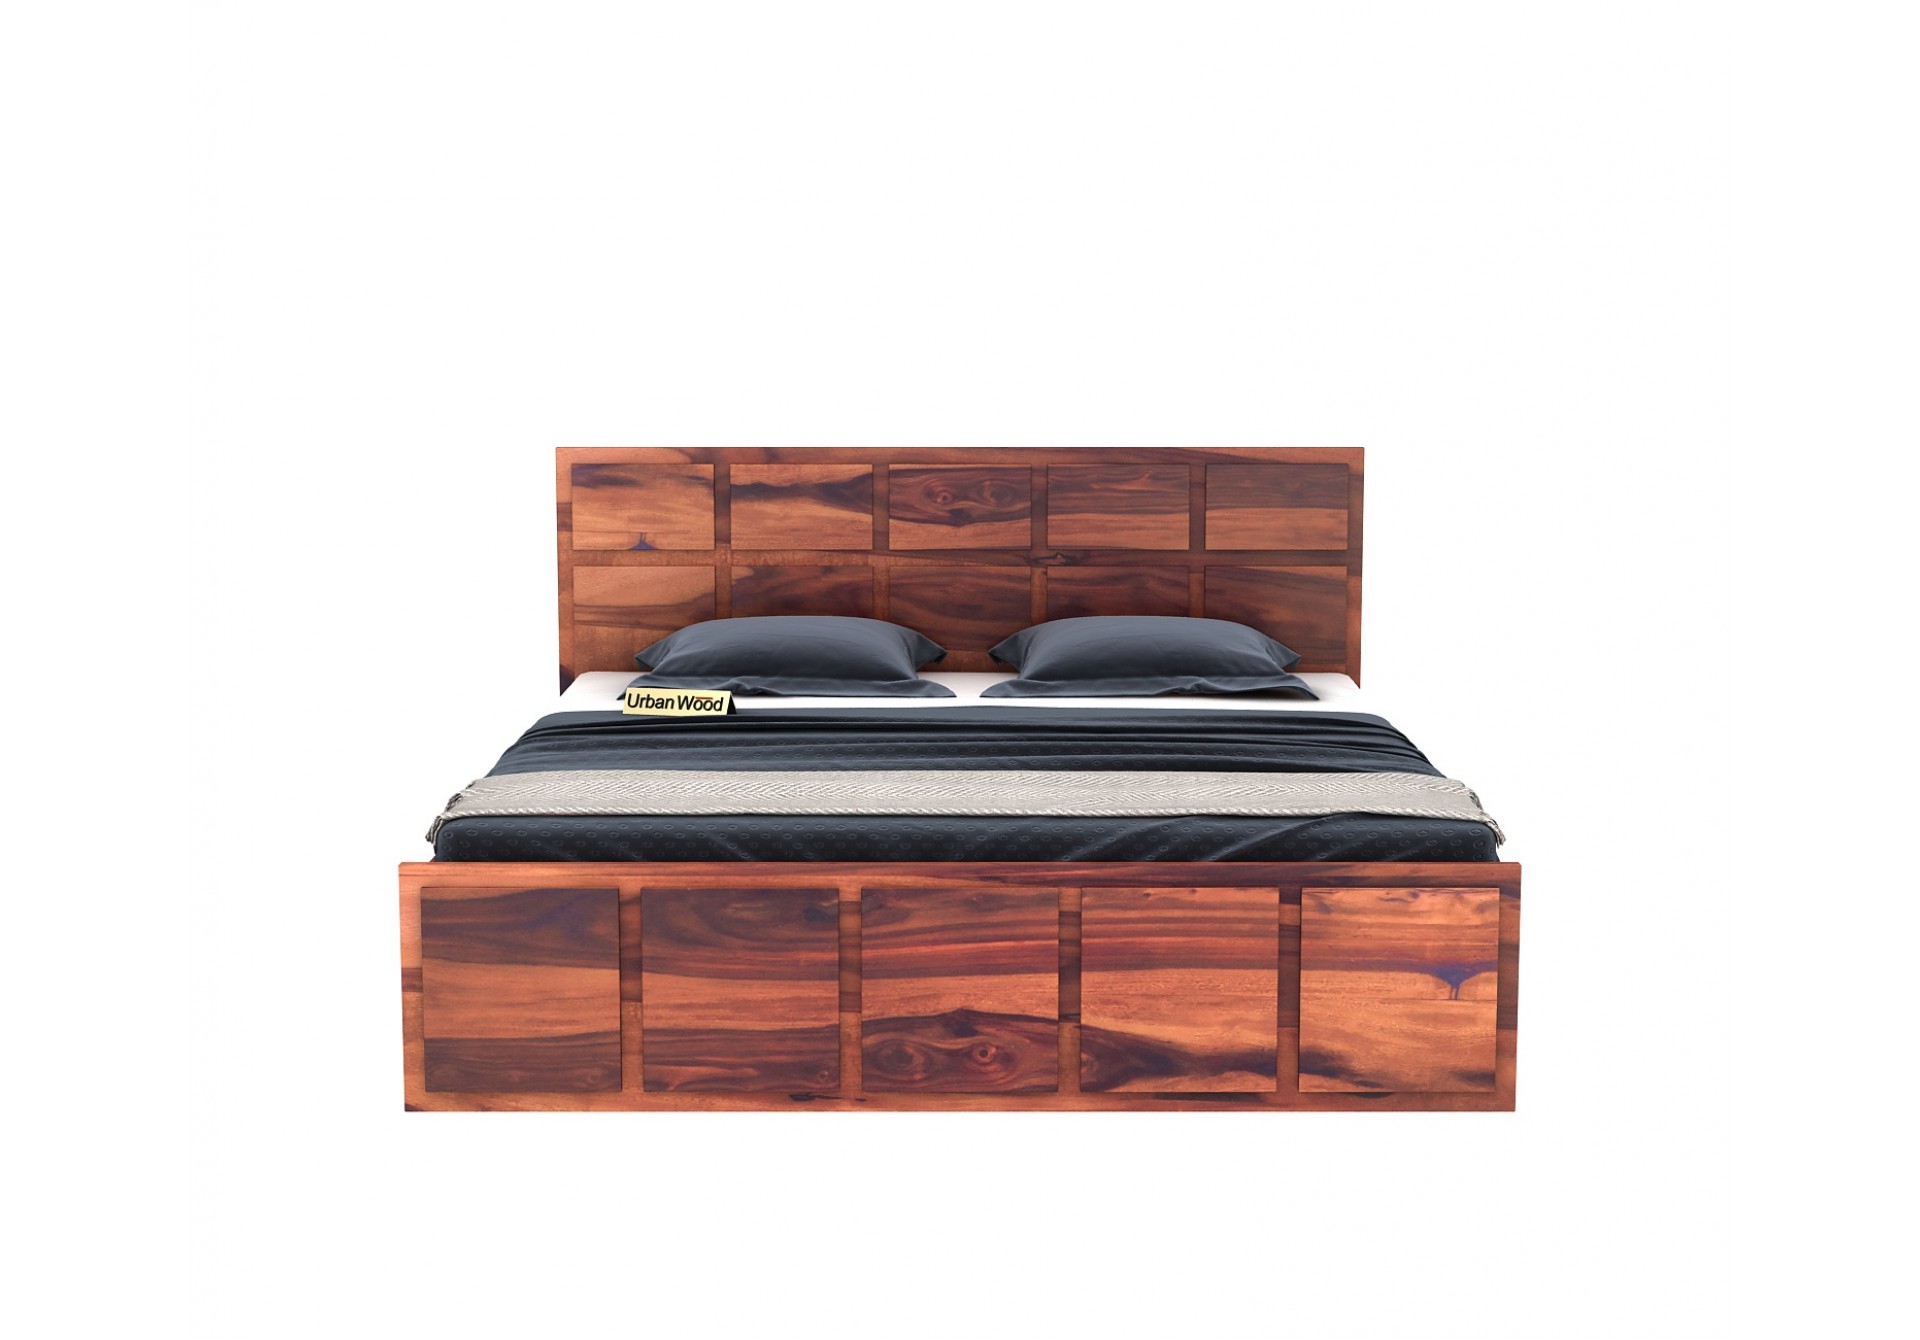 Bedswind Bed With Storage ( King Size, Teak Finish )